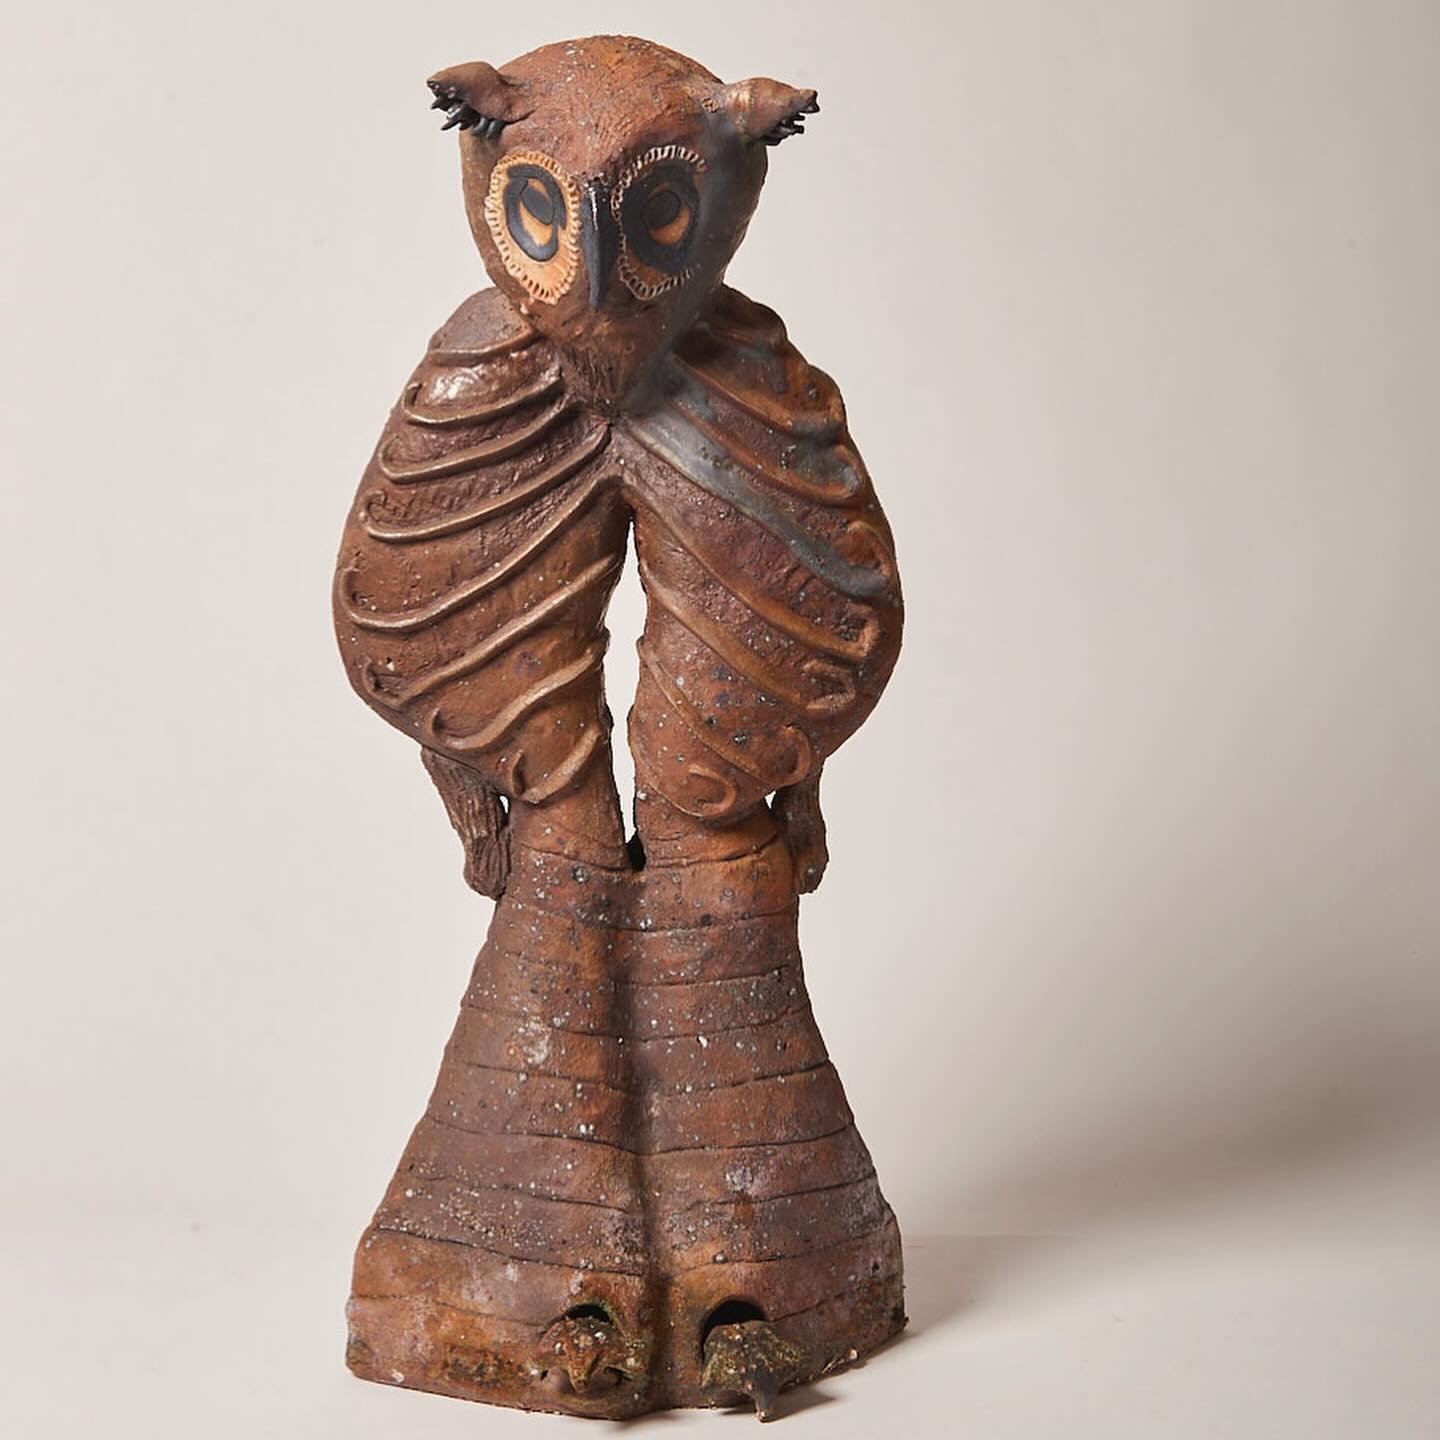 This is &ldquo;Devil Owl&rdquo; now on view in #timelessterrains @accigallery in Berkeley through May 19. I will be there on Saturday afternoon meeting up with friends- if you&rsquo;re in the neighborhood stop by and say whoo-whoo 🦉😊 This sculpture